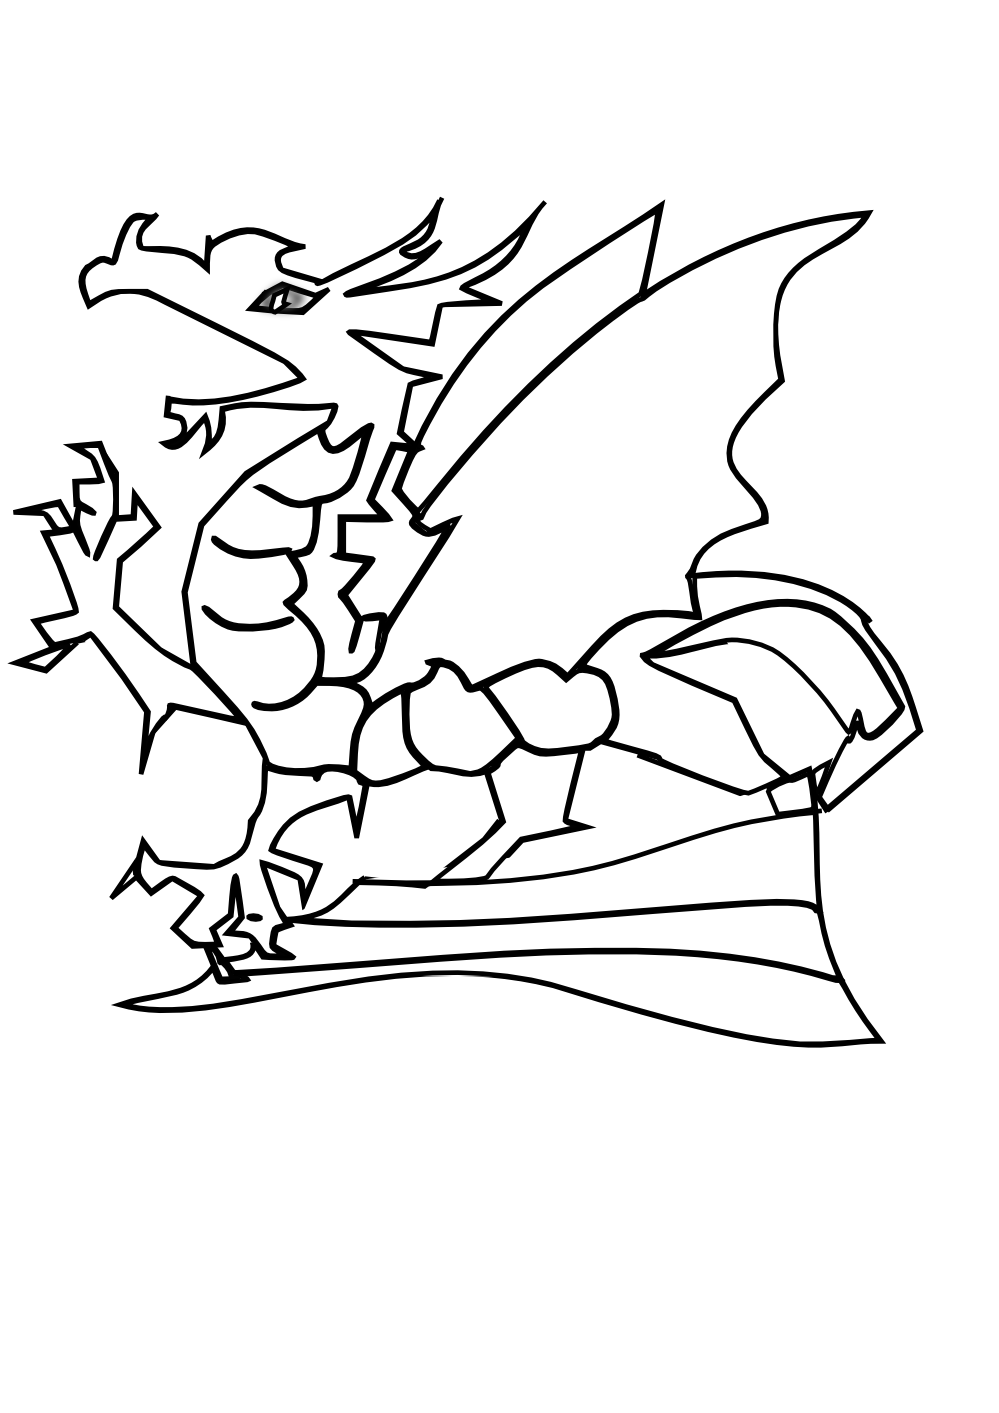 Dragon Black And White - Clipart library